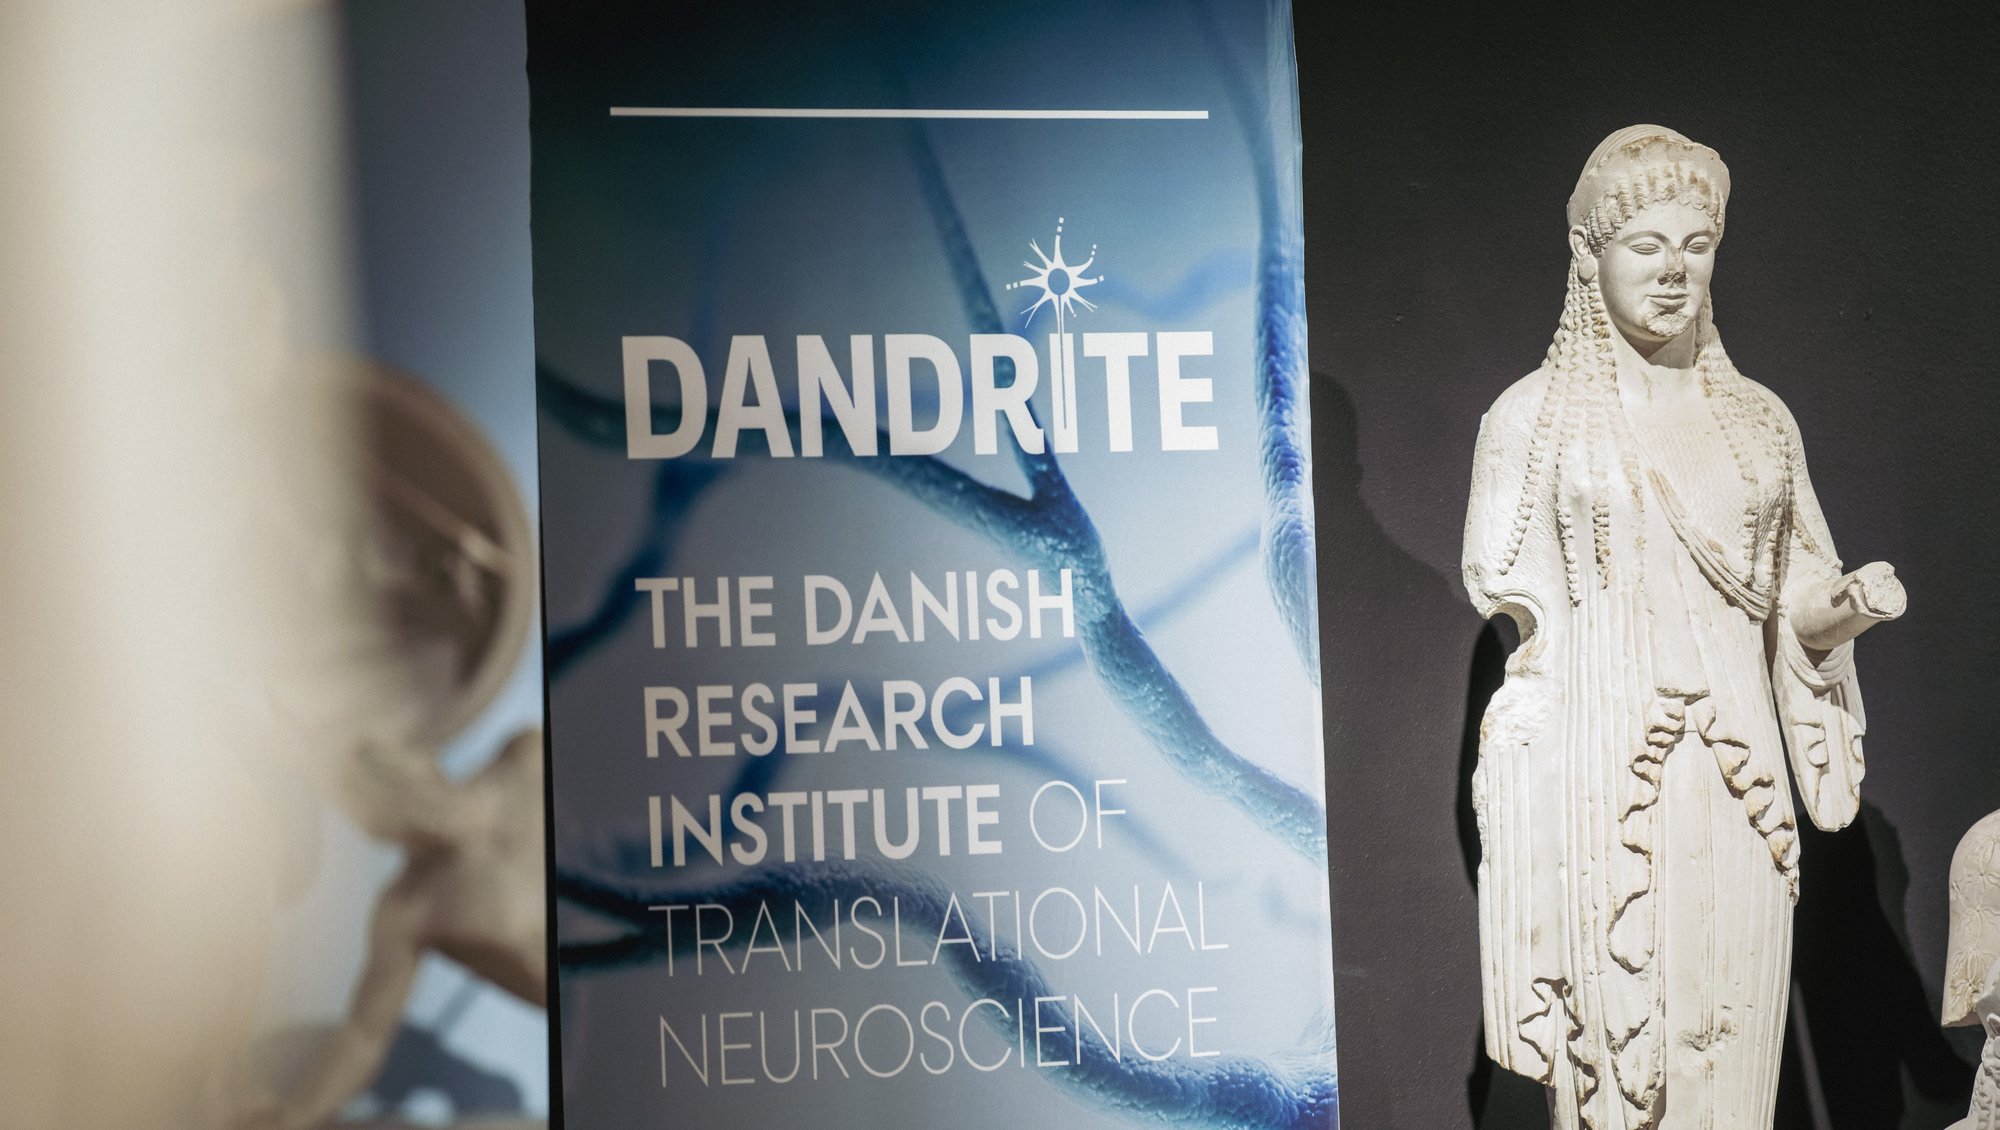 Shows a roll up banner with the DANDRITE logo next to a white statue